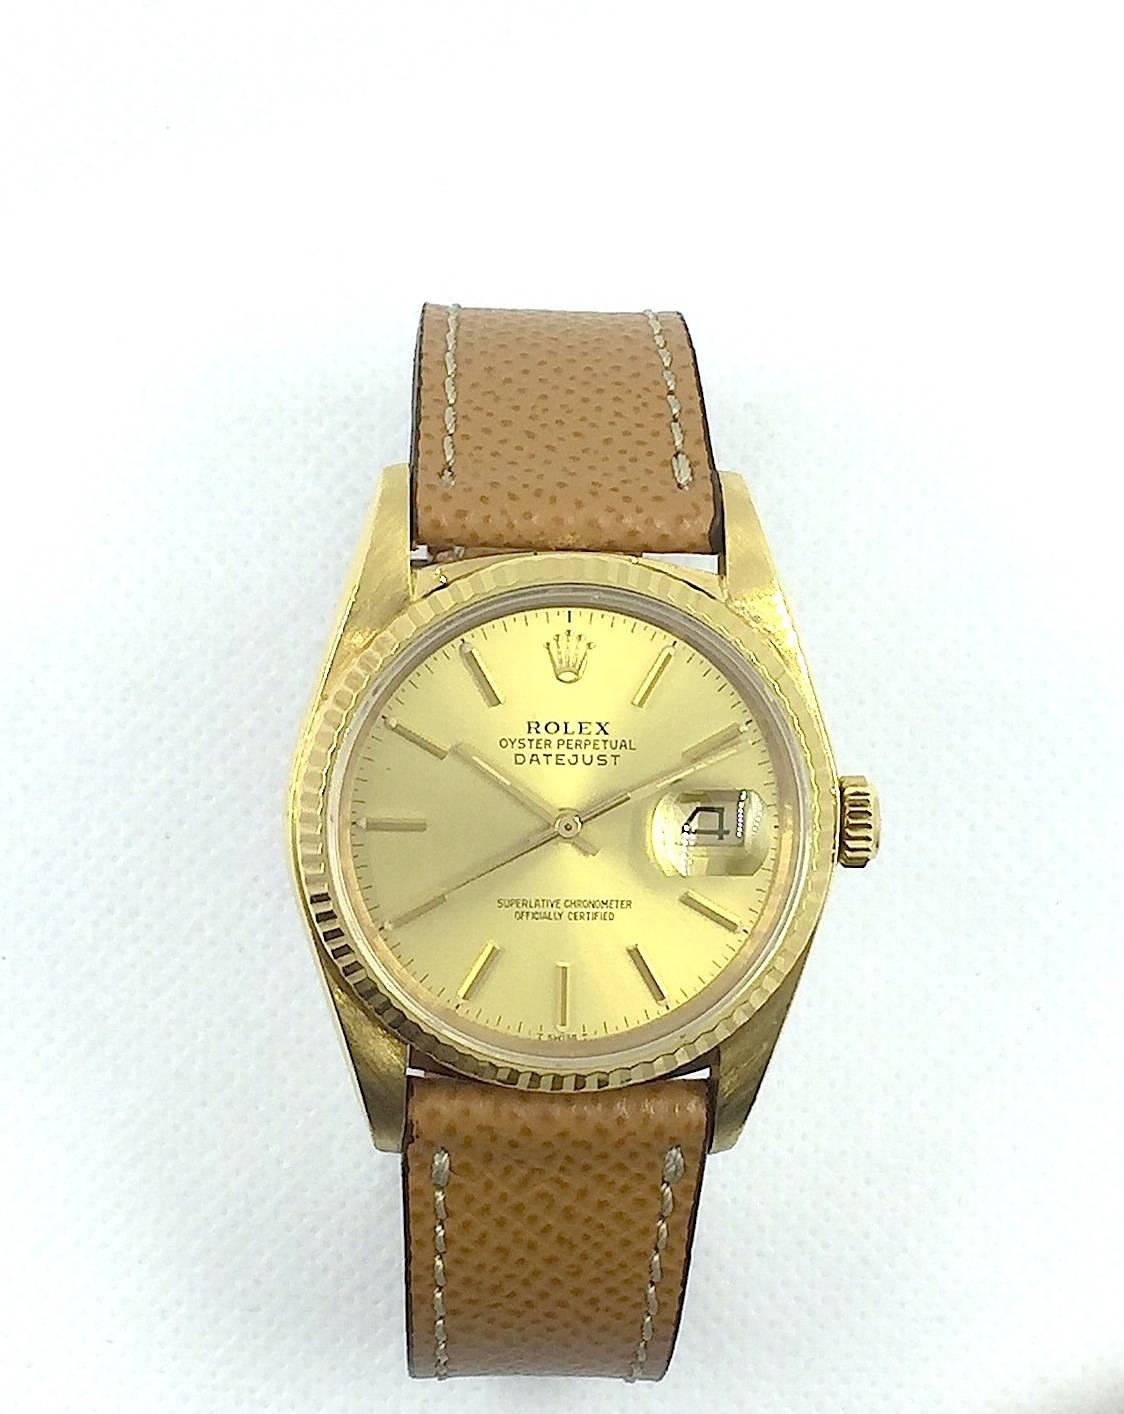 Rolex 18K Yellow Gold Oyster Perpetual Datejust Wristwatch
Factory Champagne Dial with Applied Stick Numeral Markers
18K Yellow Gold Fluted Bezel
36mm in size 
Rolex Calibre Base 3035 Automatic Quick-Set Movement
Sapphire Crystal
1980's